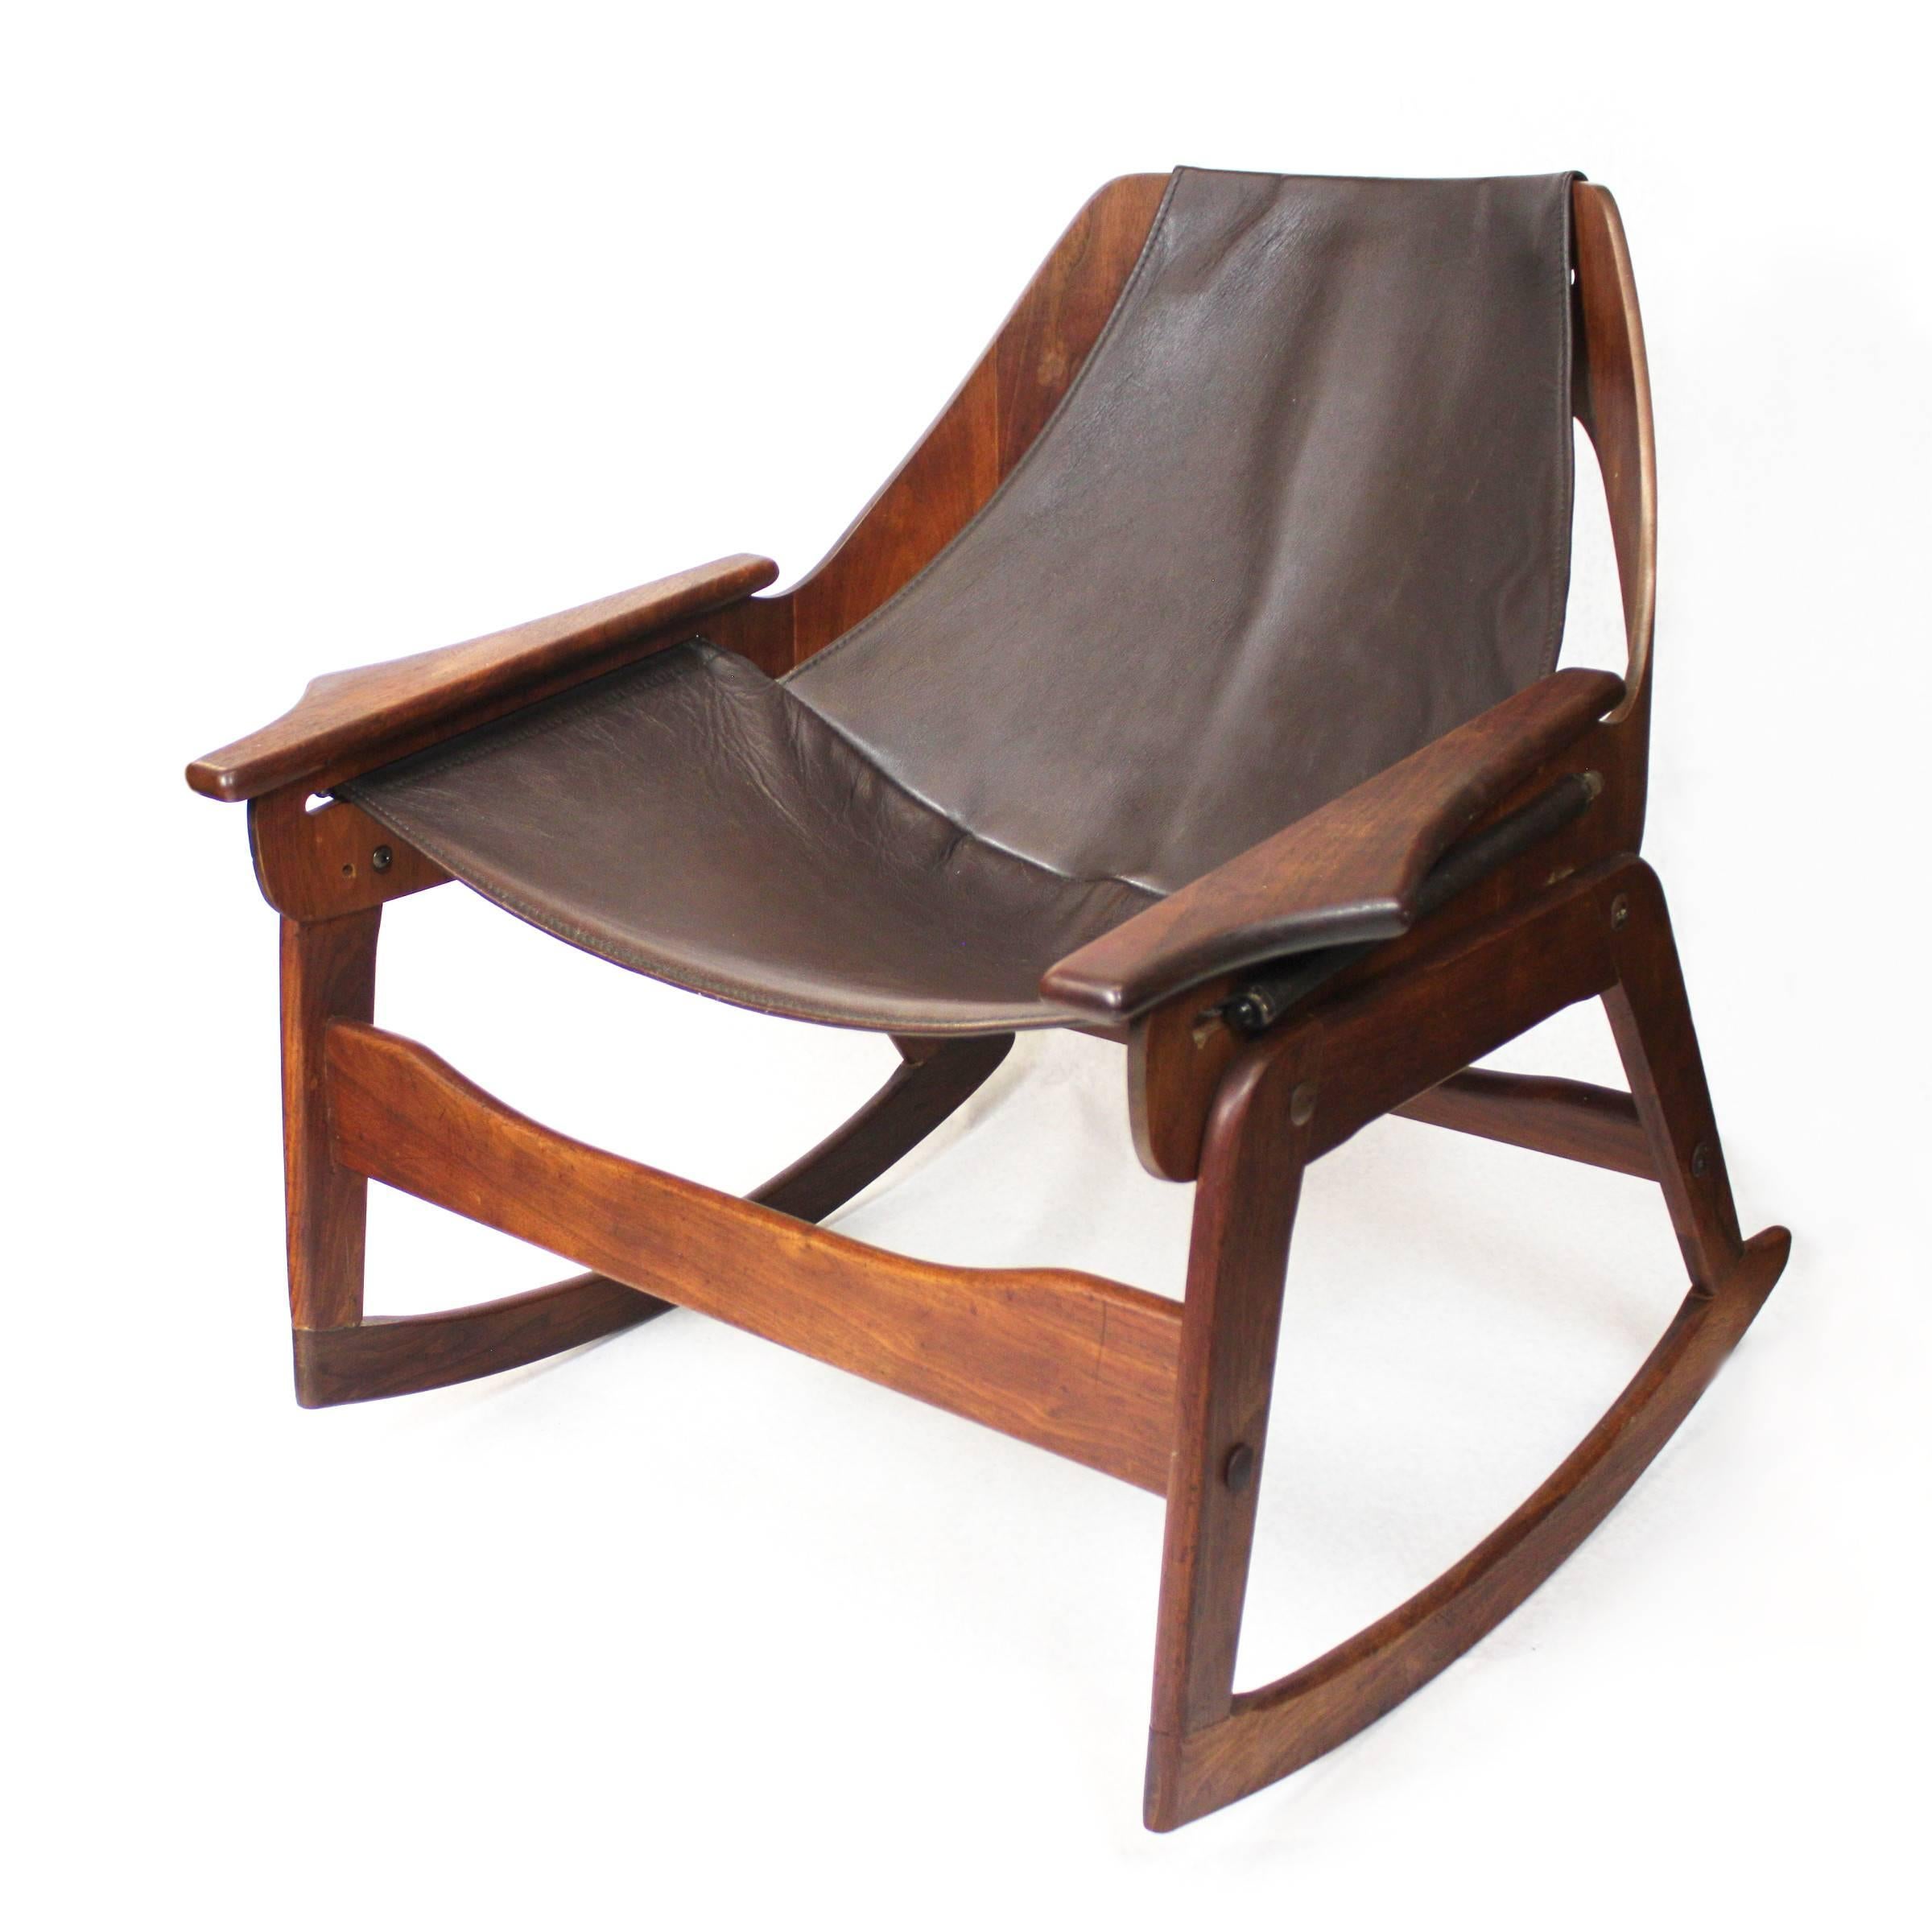 A stunning example of the 1960s original Jerry Johnson design, this rocker is a perfect mix of Classic midcentury design features. Chair features a bent walnut plywood frame supporting a deep, mocha brown leather sling cantilevered over a sculpted,